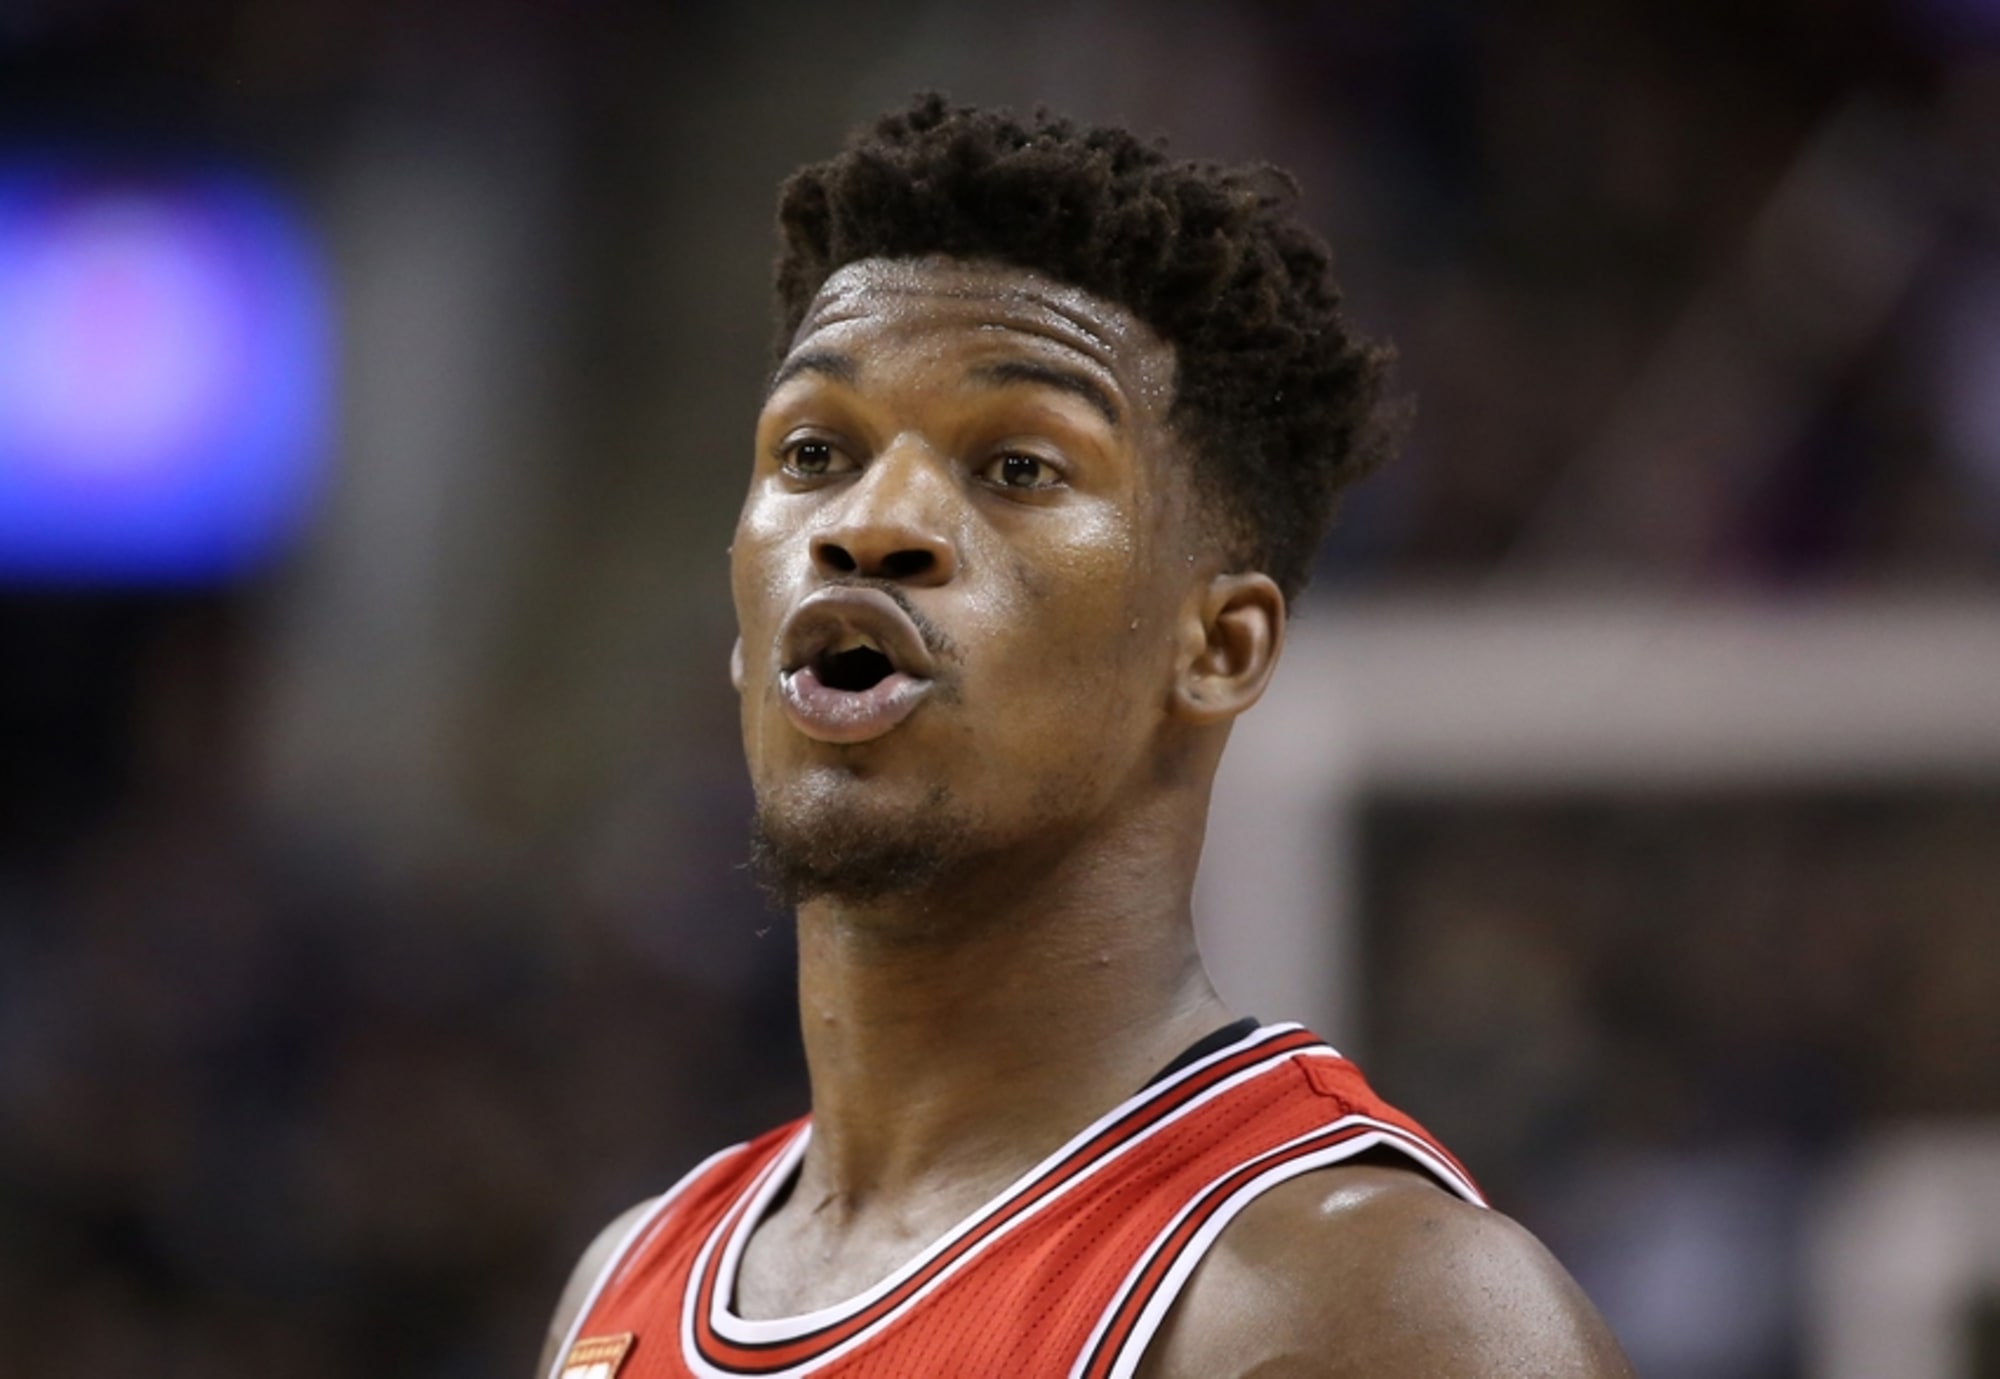 Report: Bulls teammates say Jimmy Butler receives 'preferential